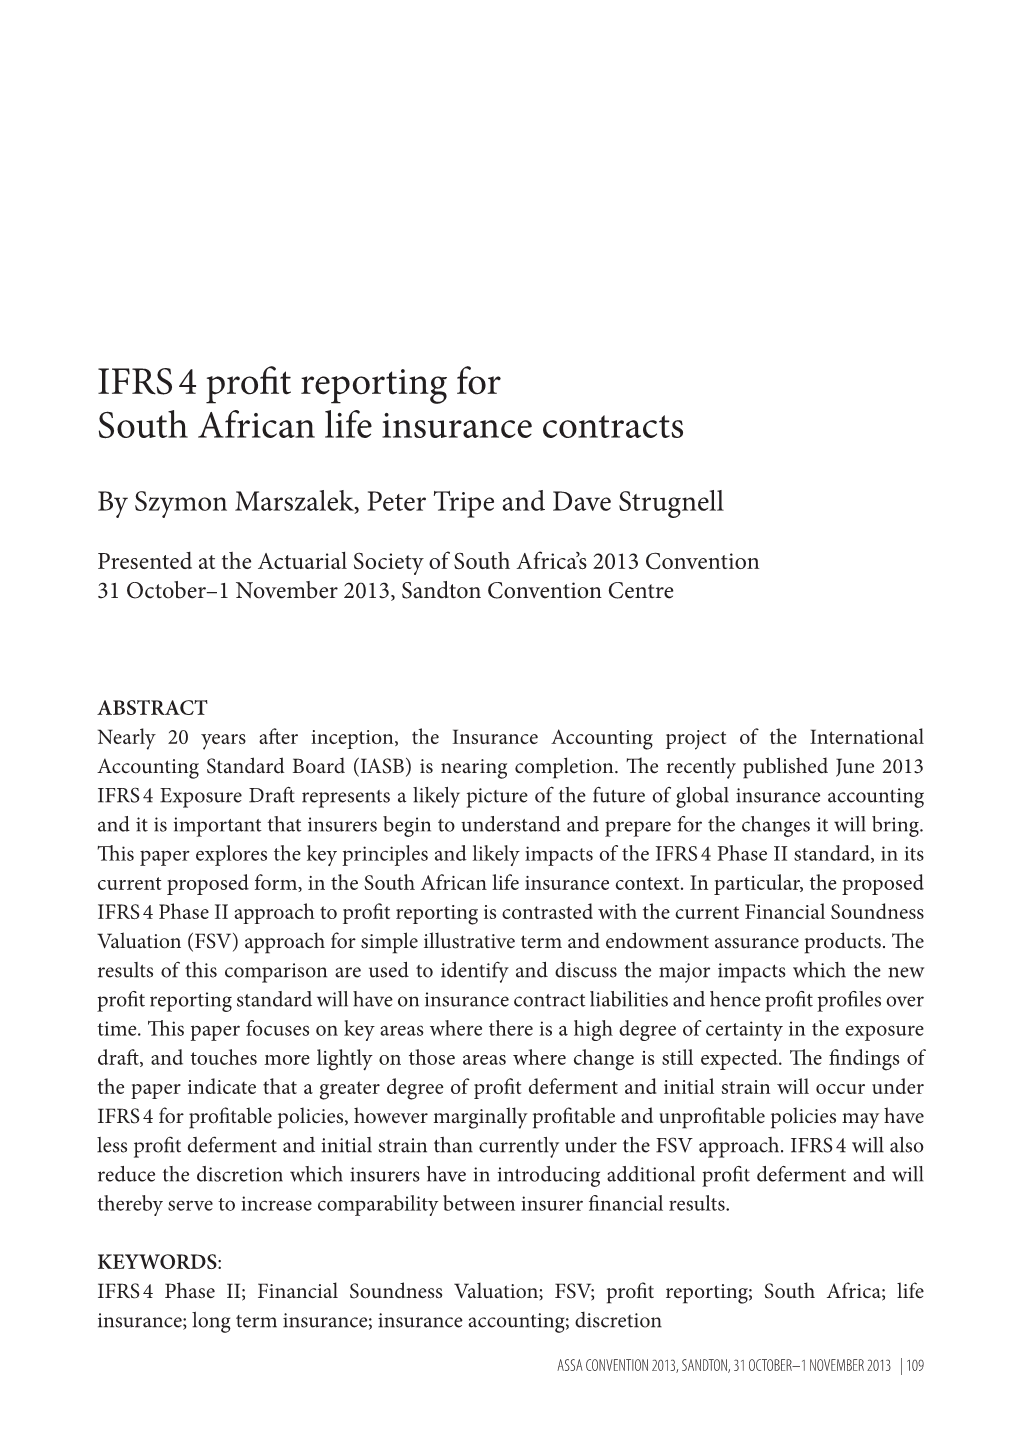 IFRS 4 Profit Reporting for South African Life Insurance Contracts